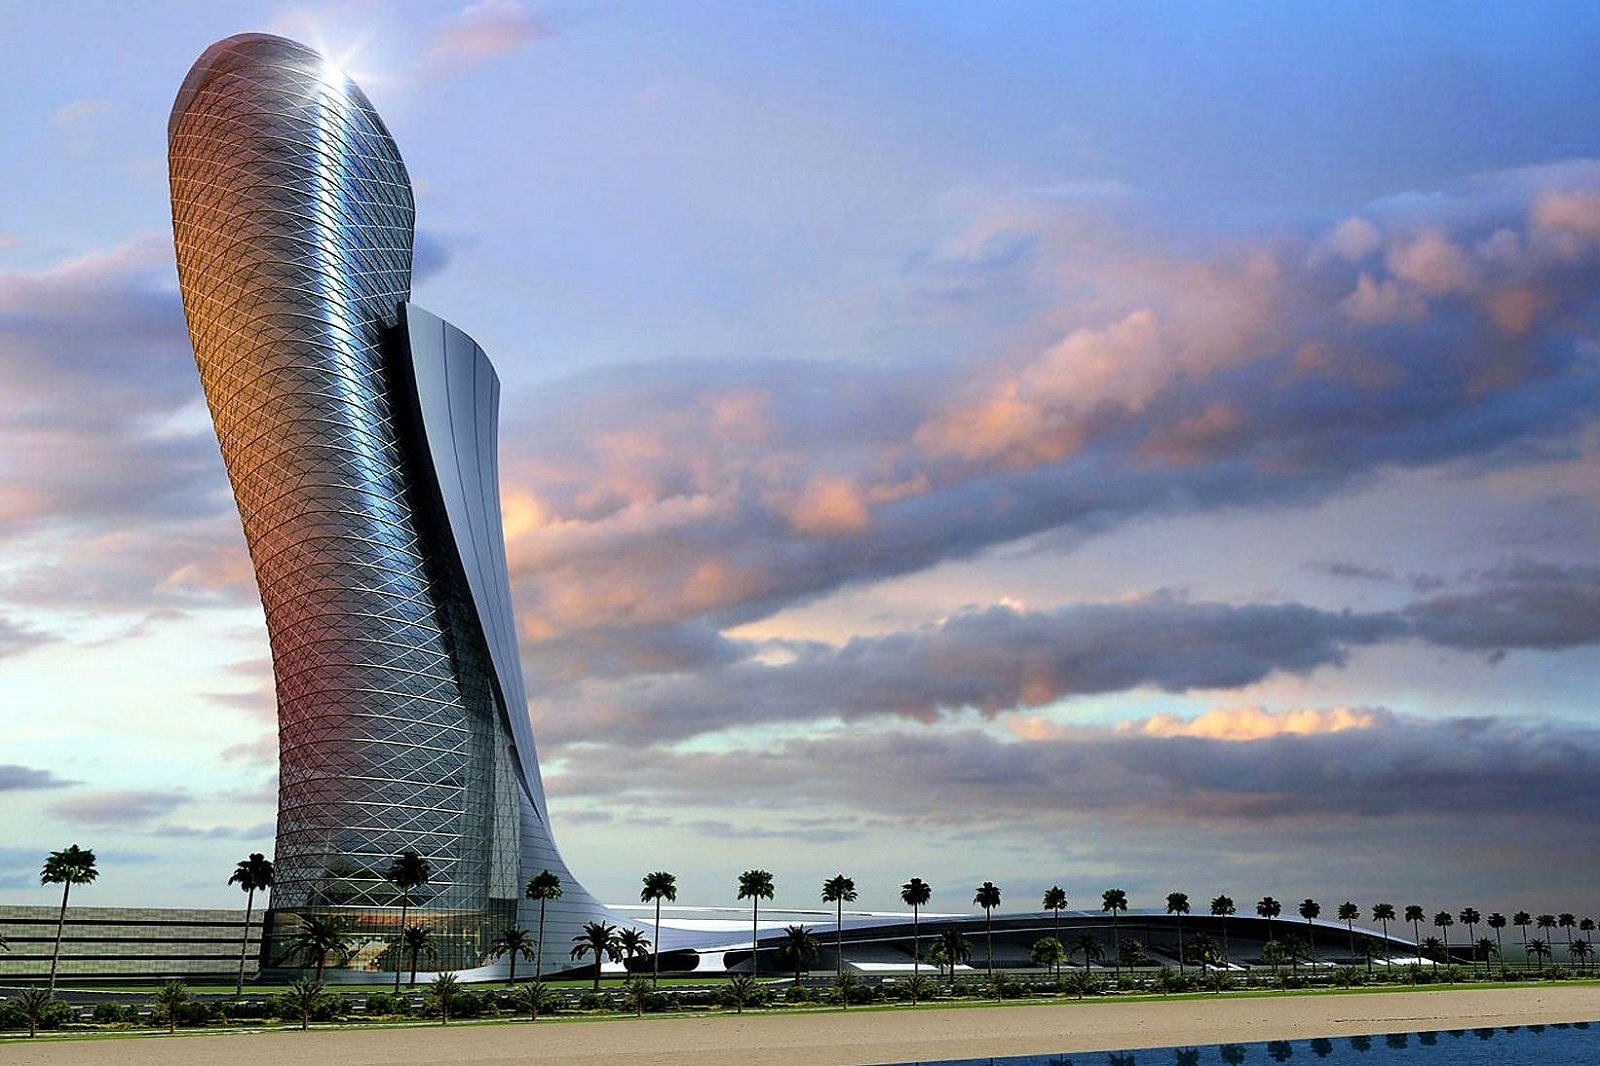 How to go up the Falling tower in Abu Dhabi